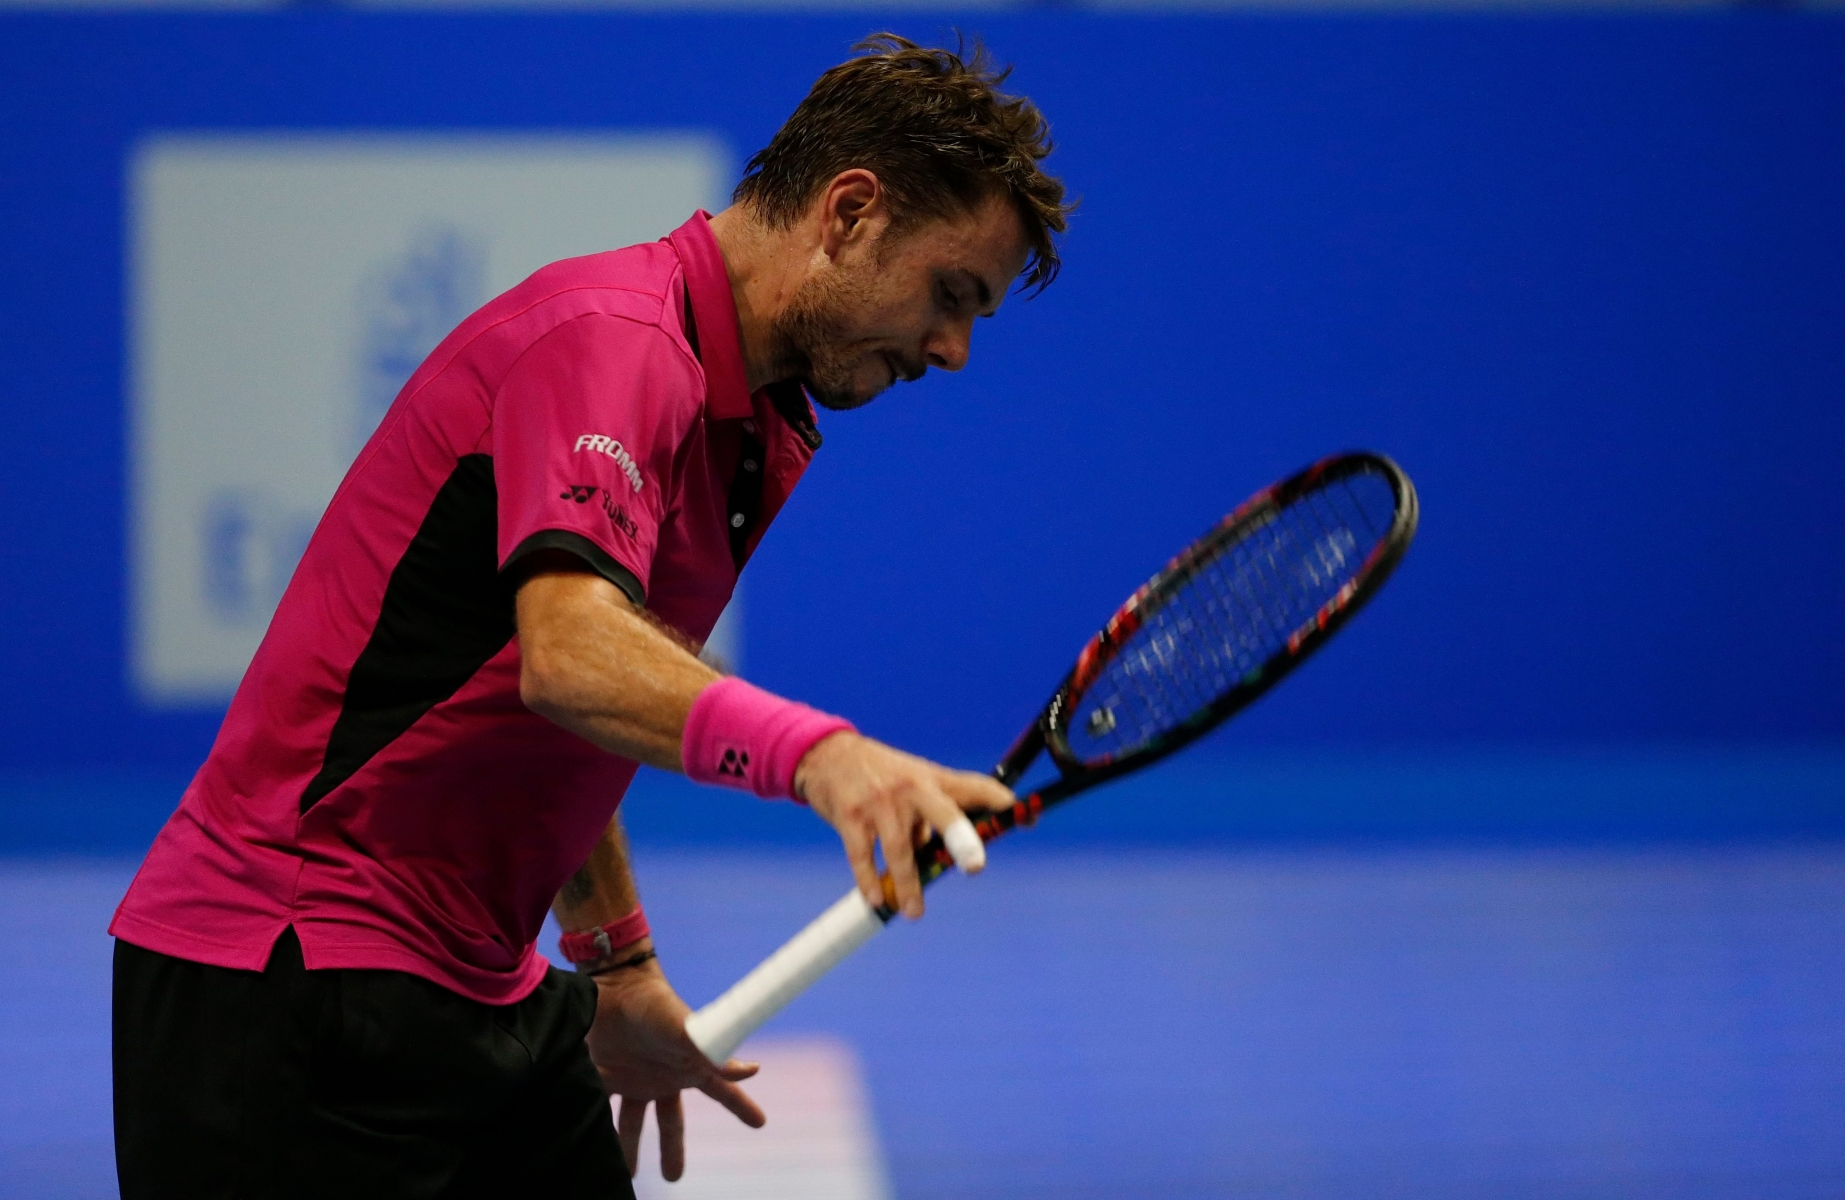 epa05554459 Stan Wawrinka of Switzerland in action against Roberto Bautista Agut of Spain during their semi-final match at the St. Petersburg Open ATP tennis tournament in St.Petersburg, Russia, 24 September 2016.  EPA/ANATOLY MALTSEV RUSSIA TENNIS SPB OPEN